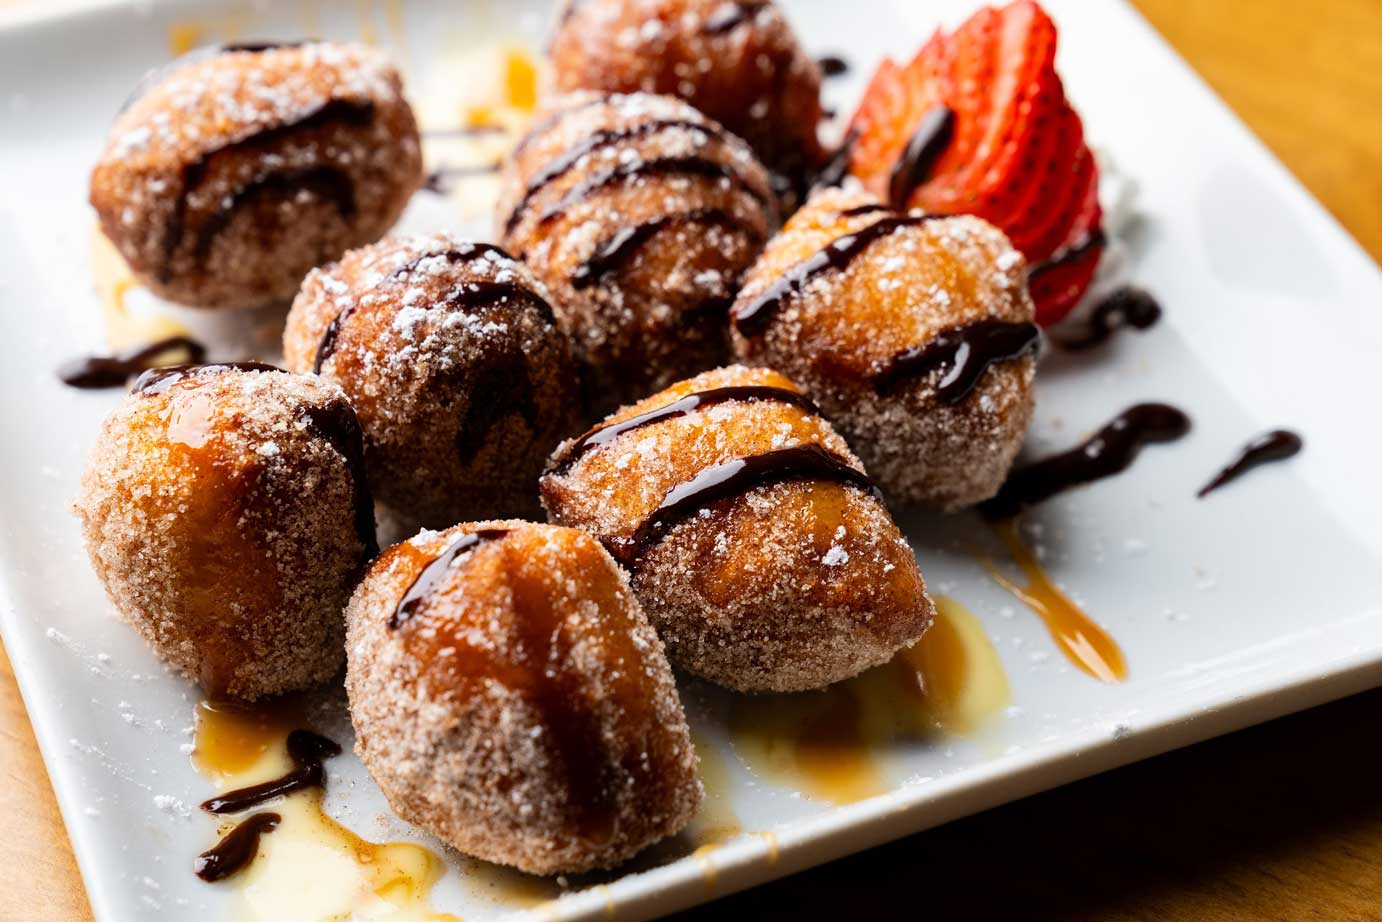 Mini donut balls, with chocolate drizzle and strawberry